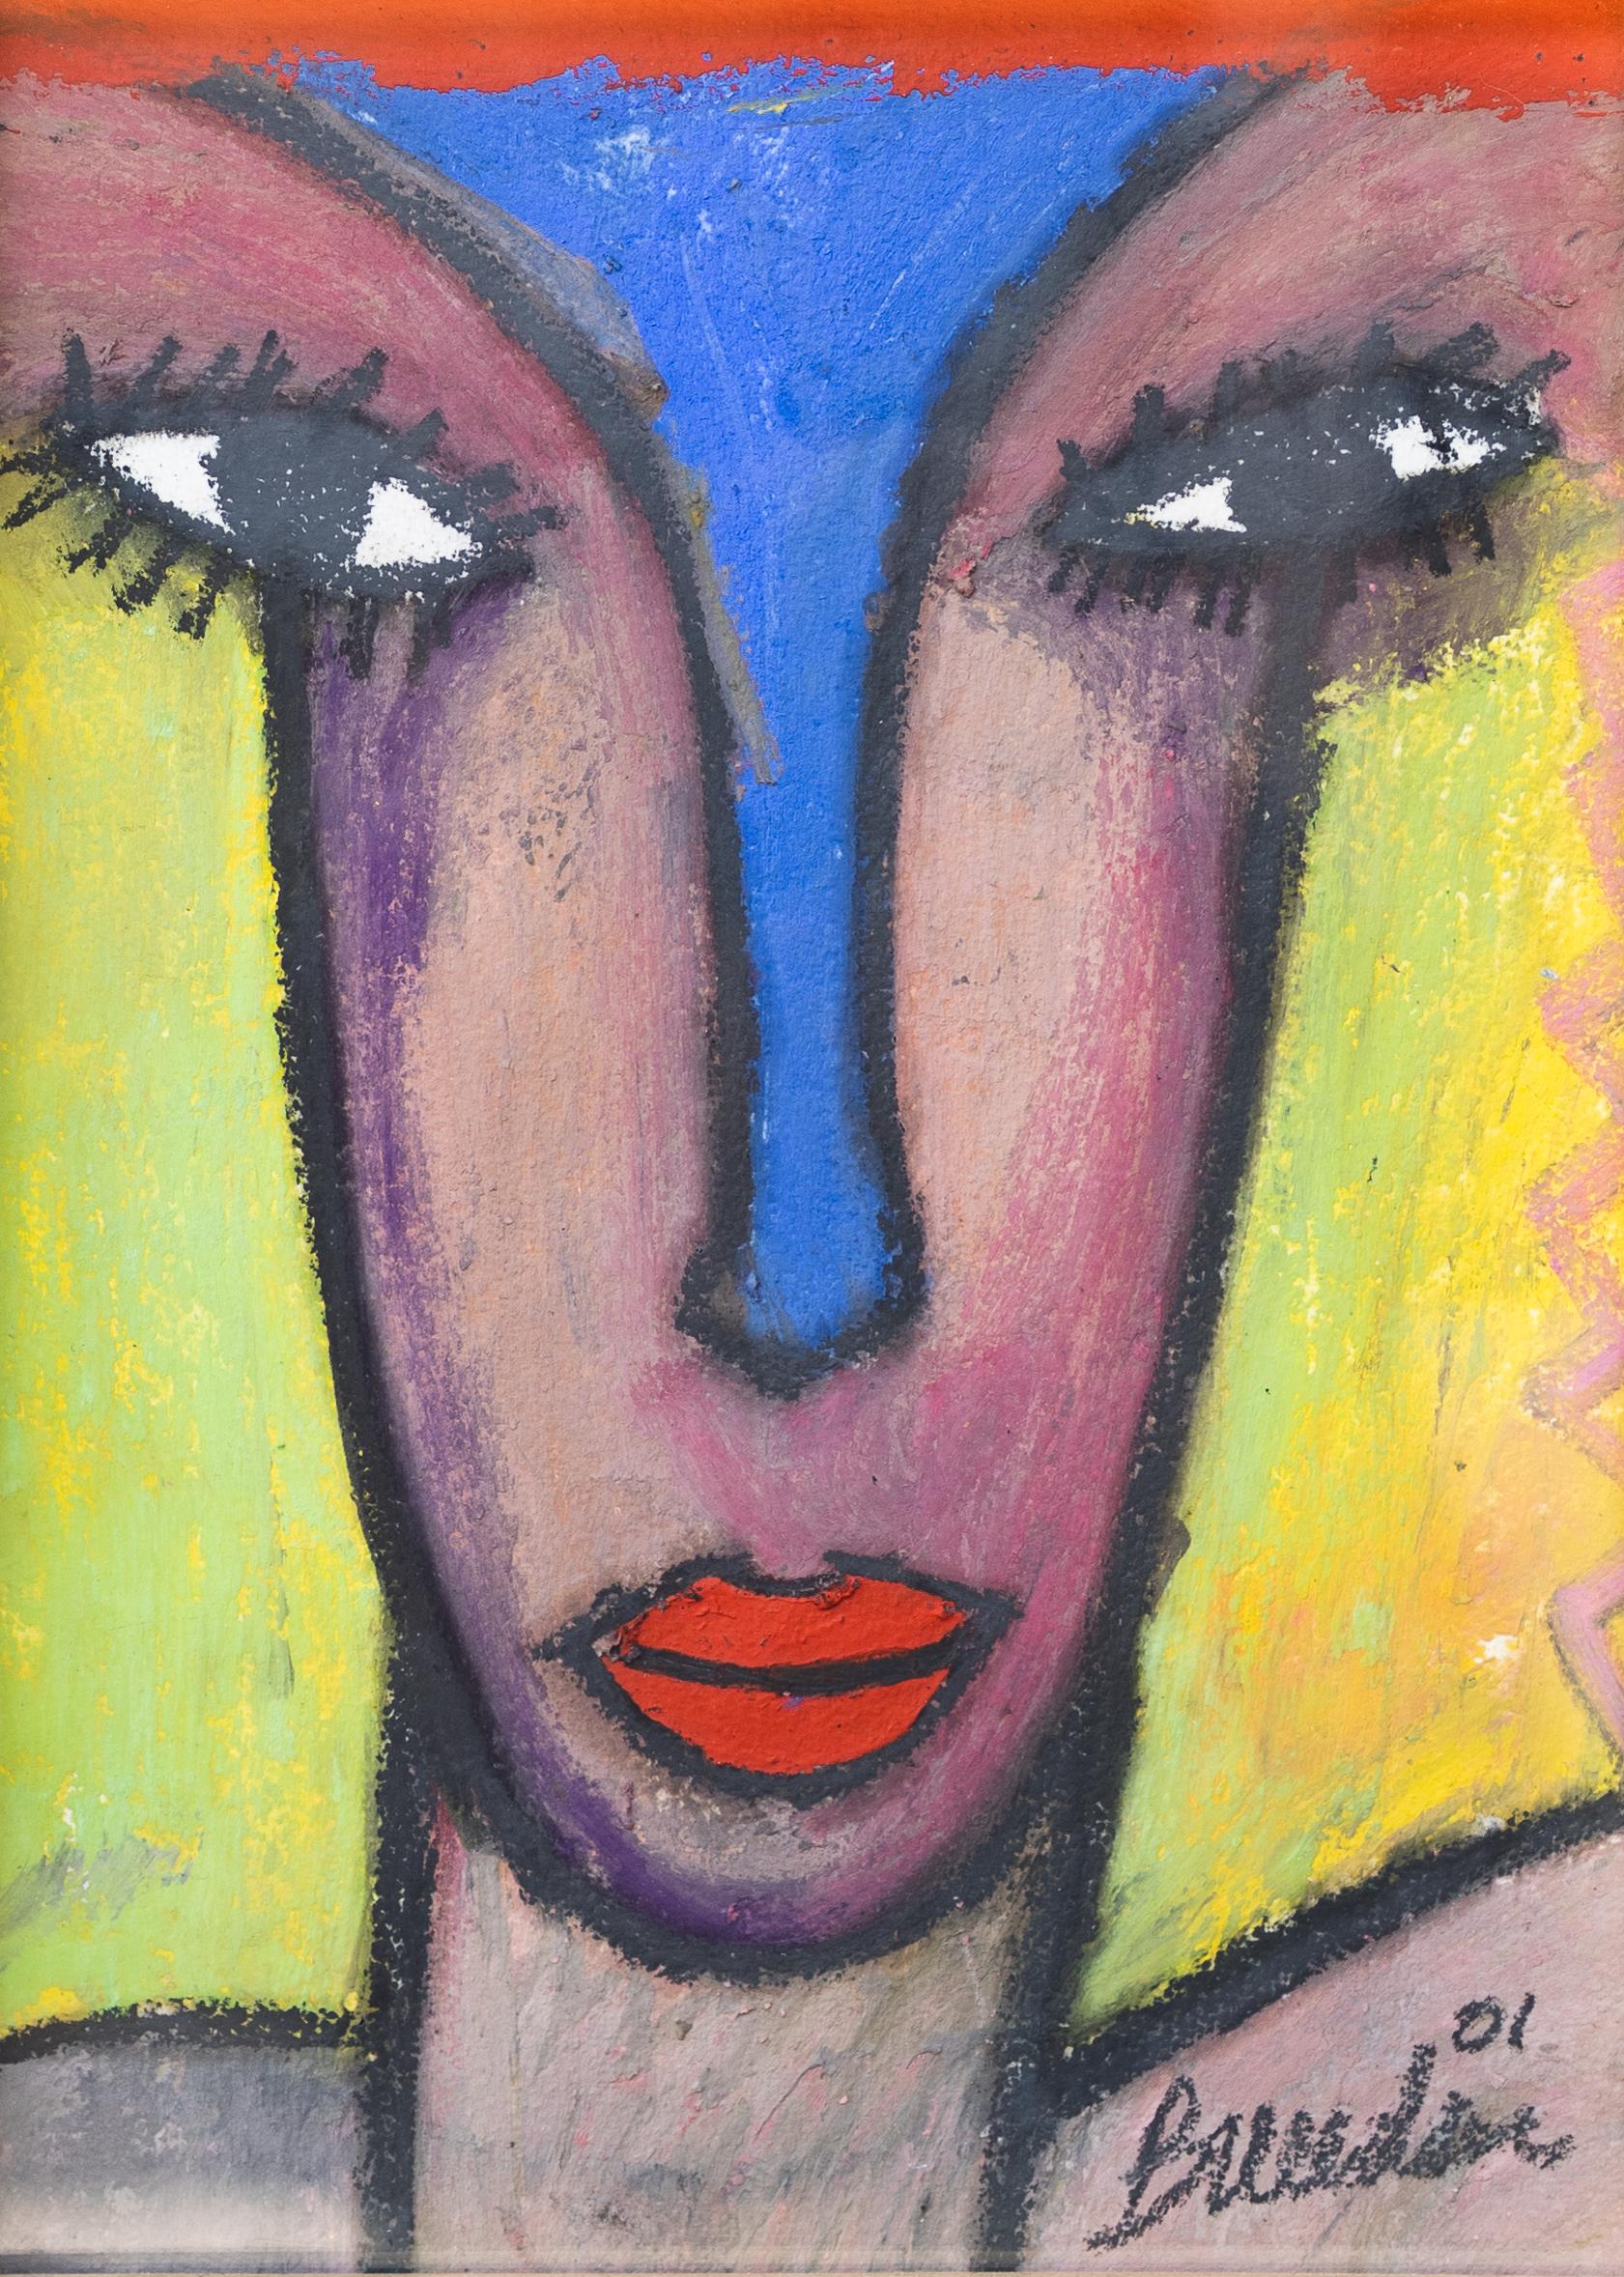 Portrait of a Woman - Expressionist Mixed Media Piece